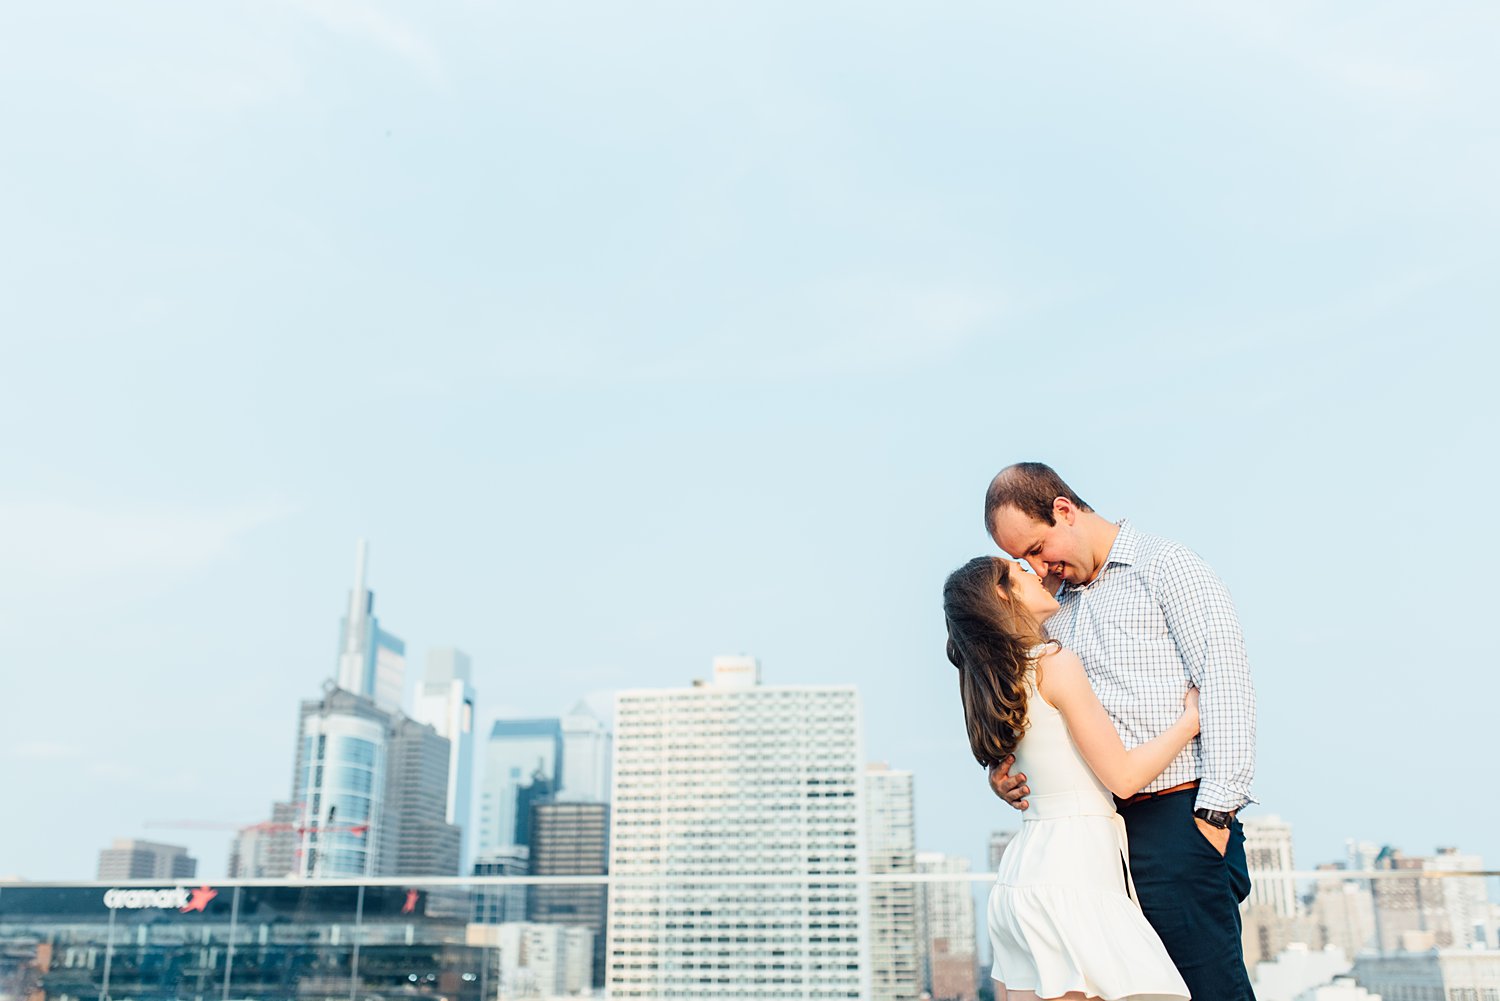 Hallie + Andrew - Fitler Square Engagement Session - Maryland Engagement Photographer - Alison Dunn Photography photo